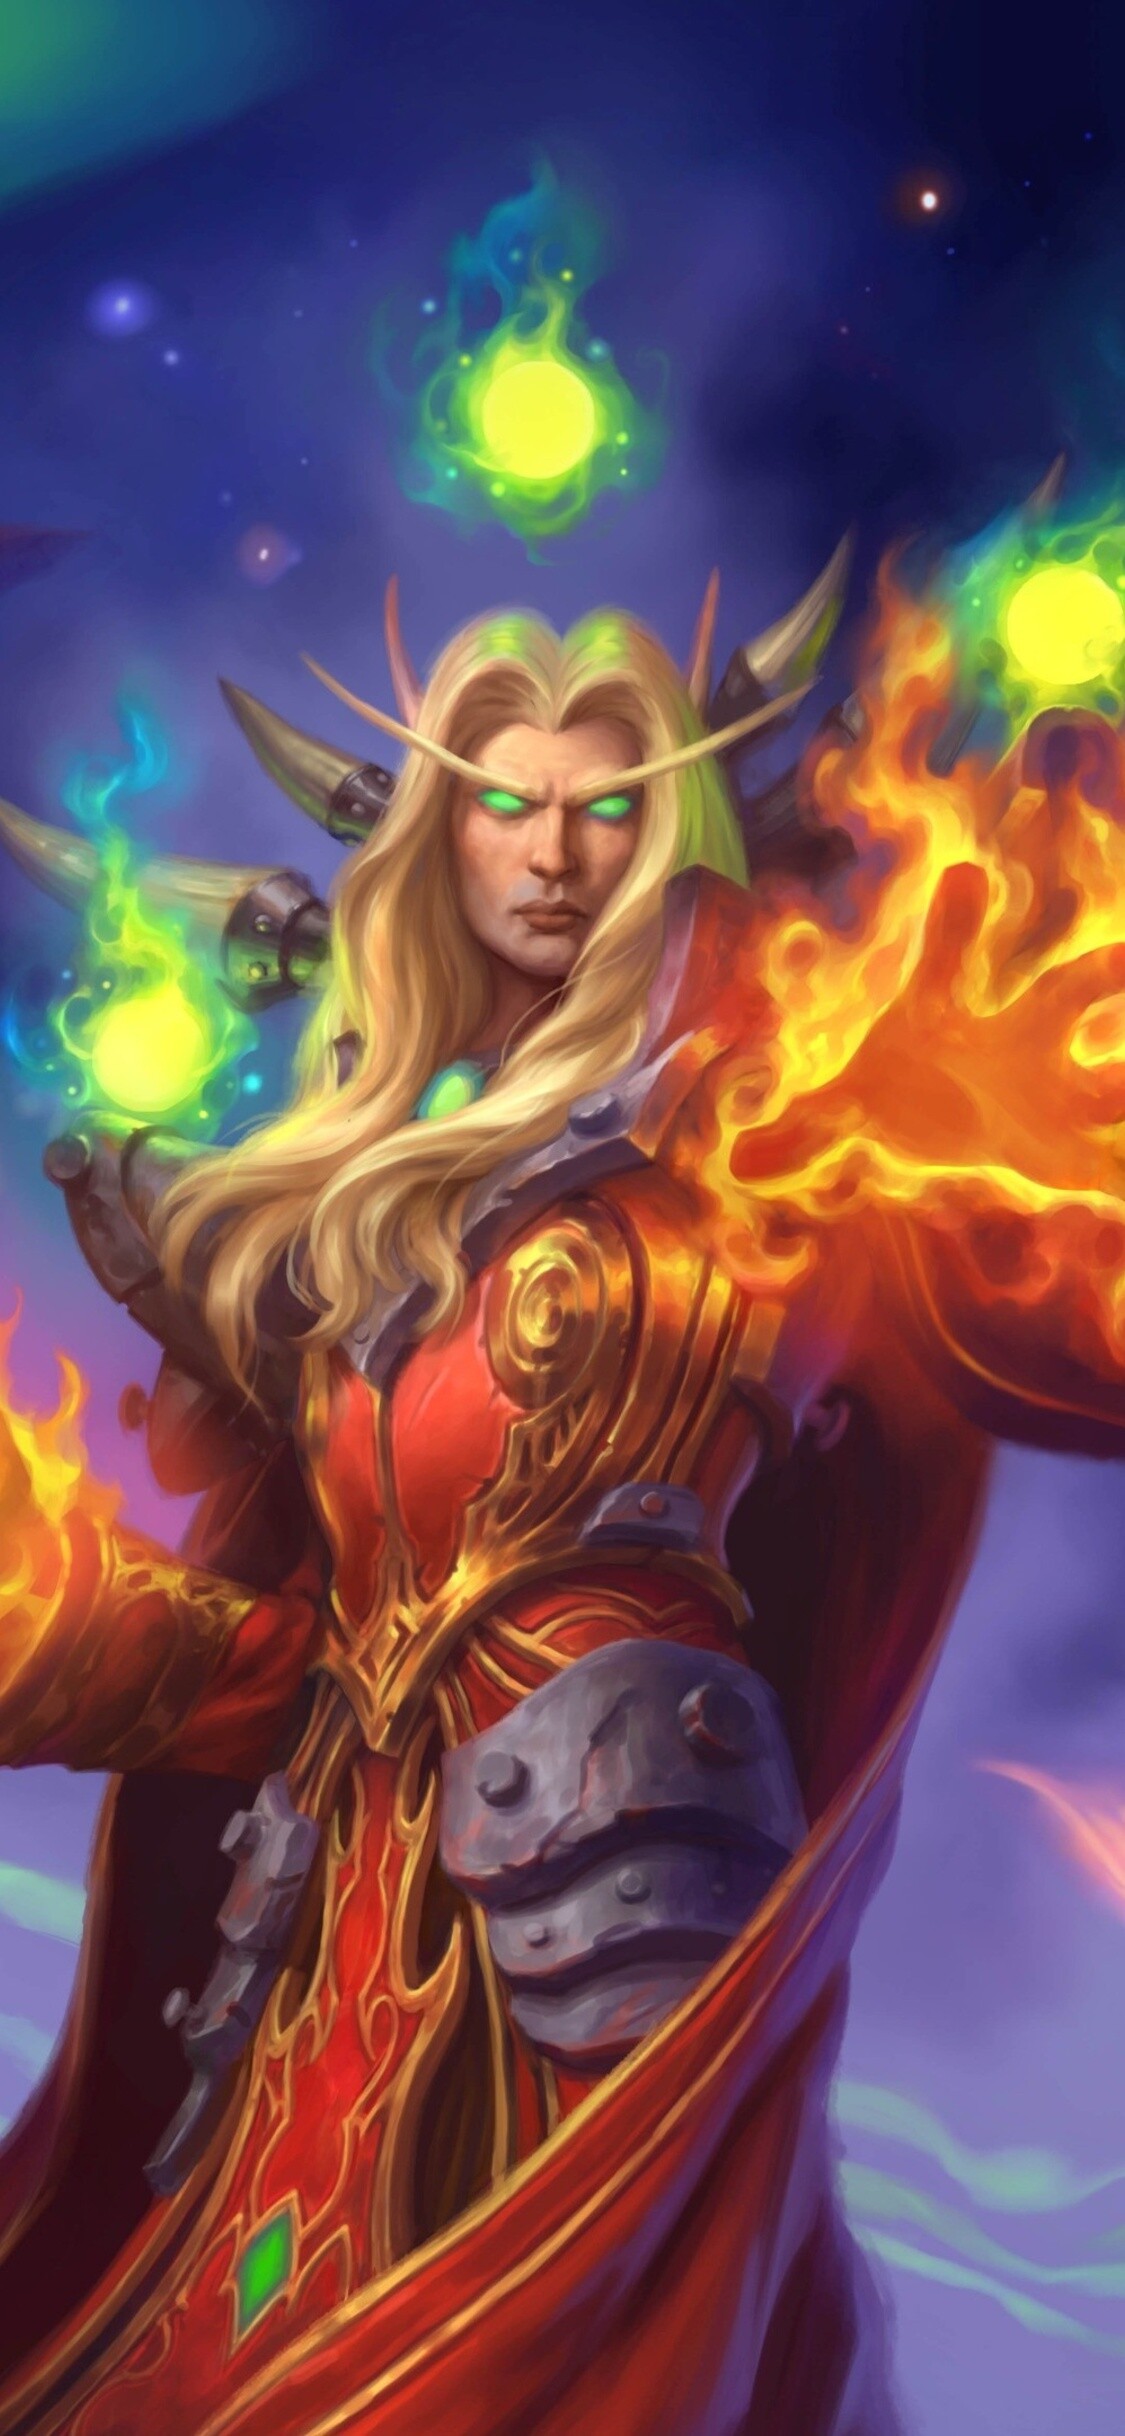 Hearthstone: Kael'thas, A hero directly borrowed from the Warcraft universe. 1130x2440 HD Wallpaper.